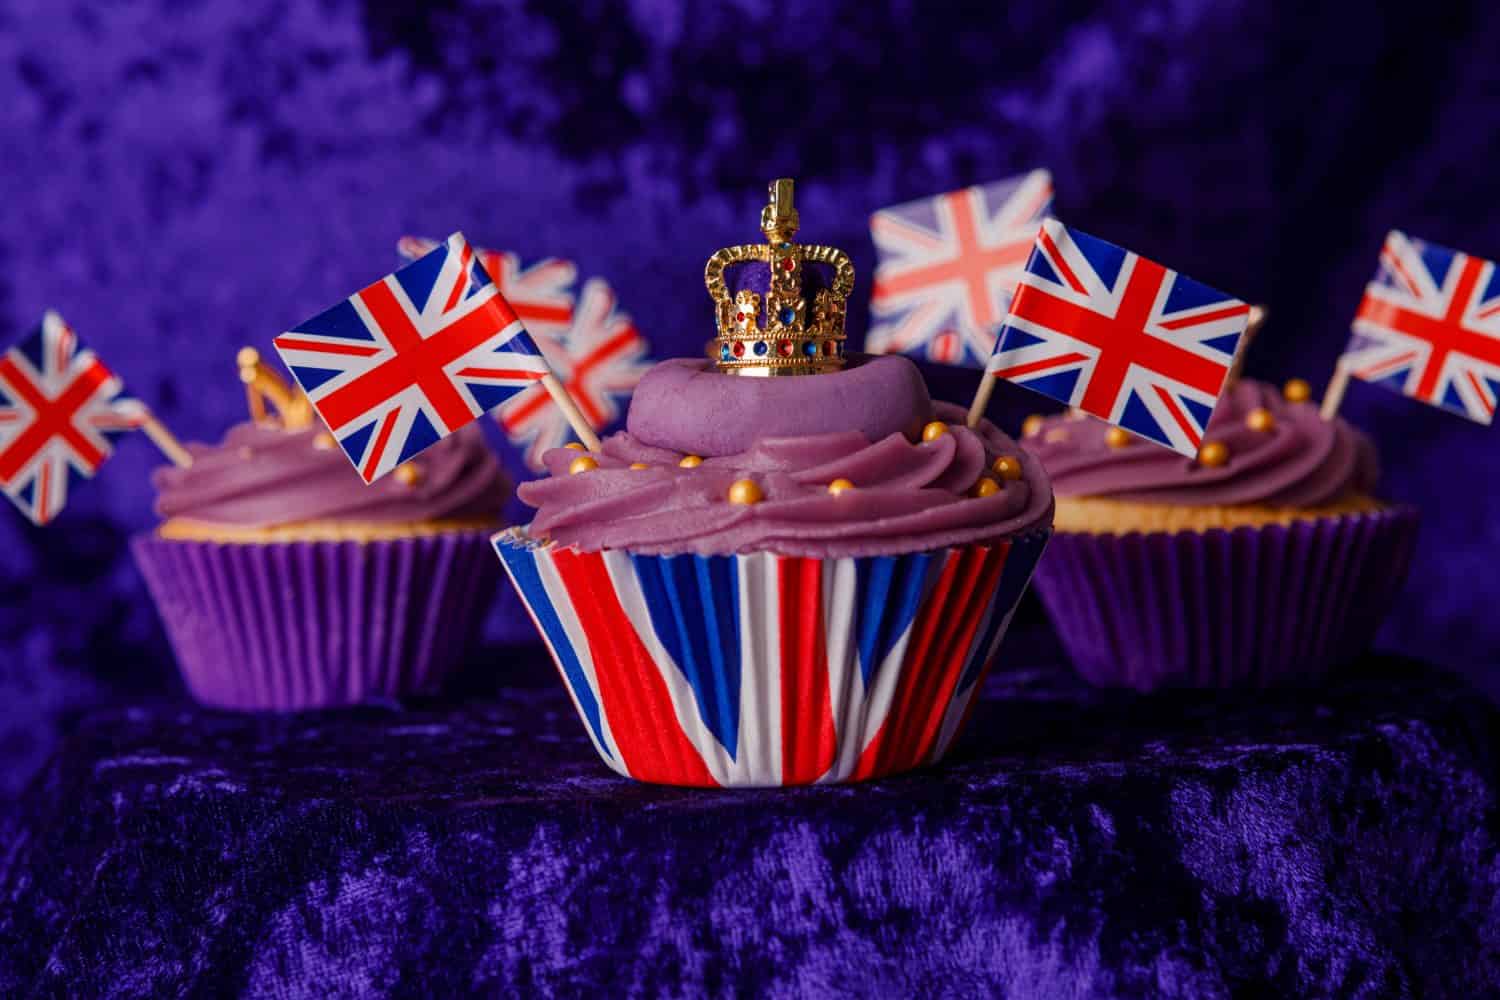 Royal Coronation Cupcakes to celebrate the coronation of King Charles III. Cupcakes decorated with the crown, purple velvet backdrop, union jacks flags, luxury cupcakes on a pedestal.